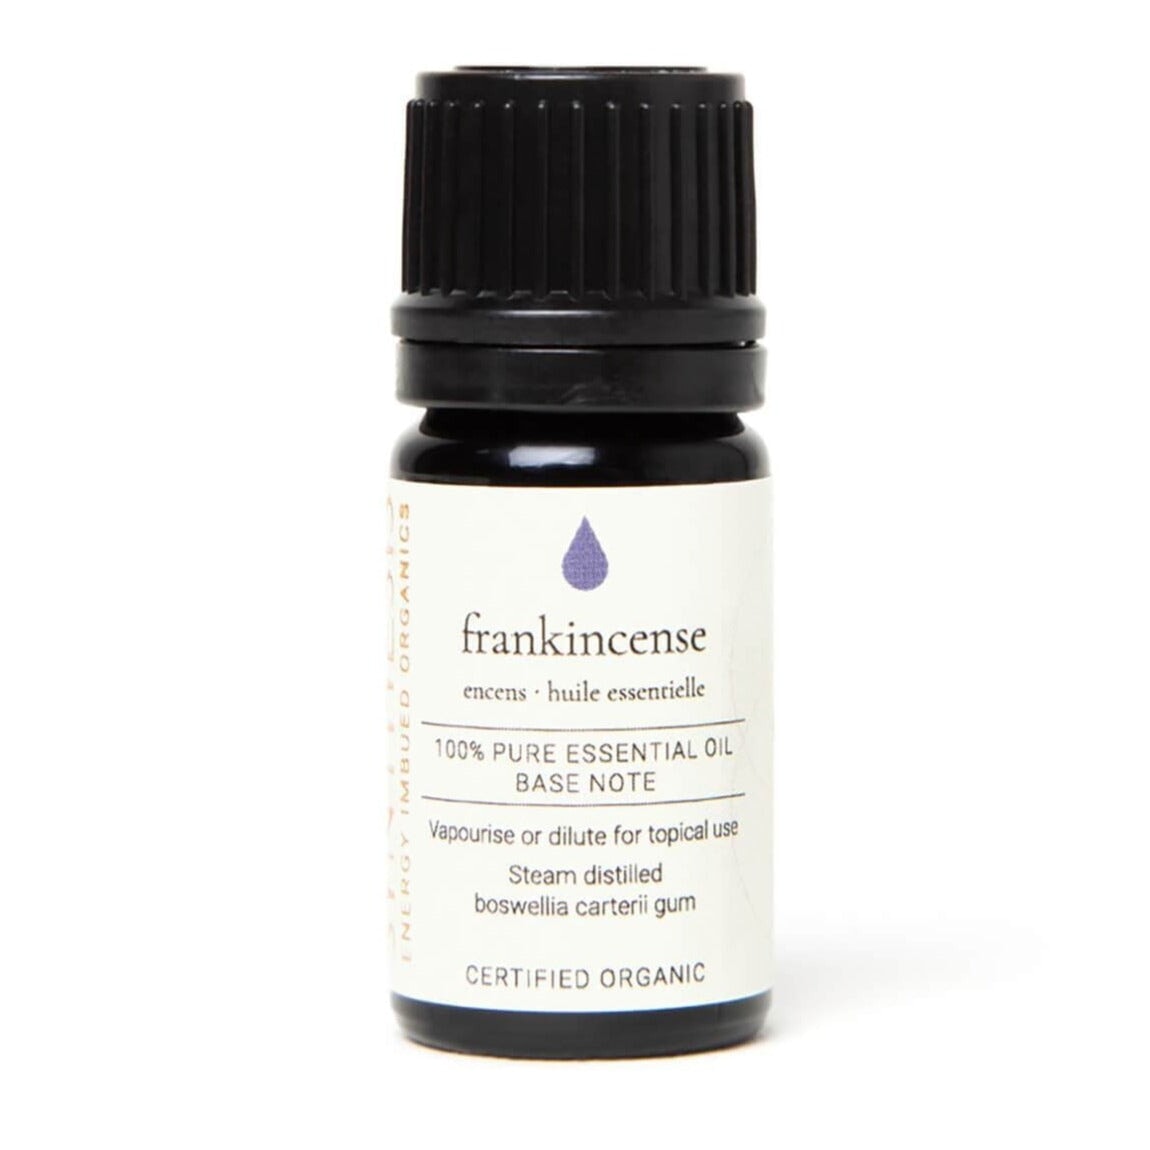 Frankincense Certified Organic Essential Oil Refill aroma Synthesis Organics 